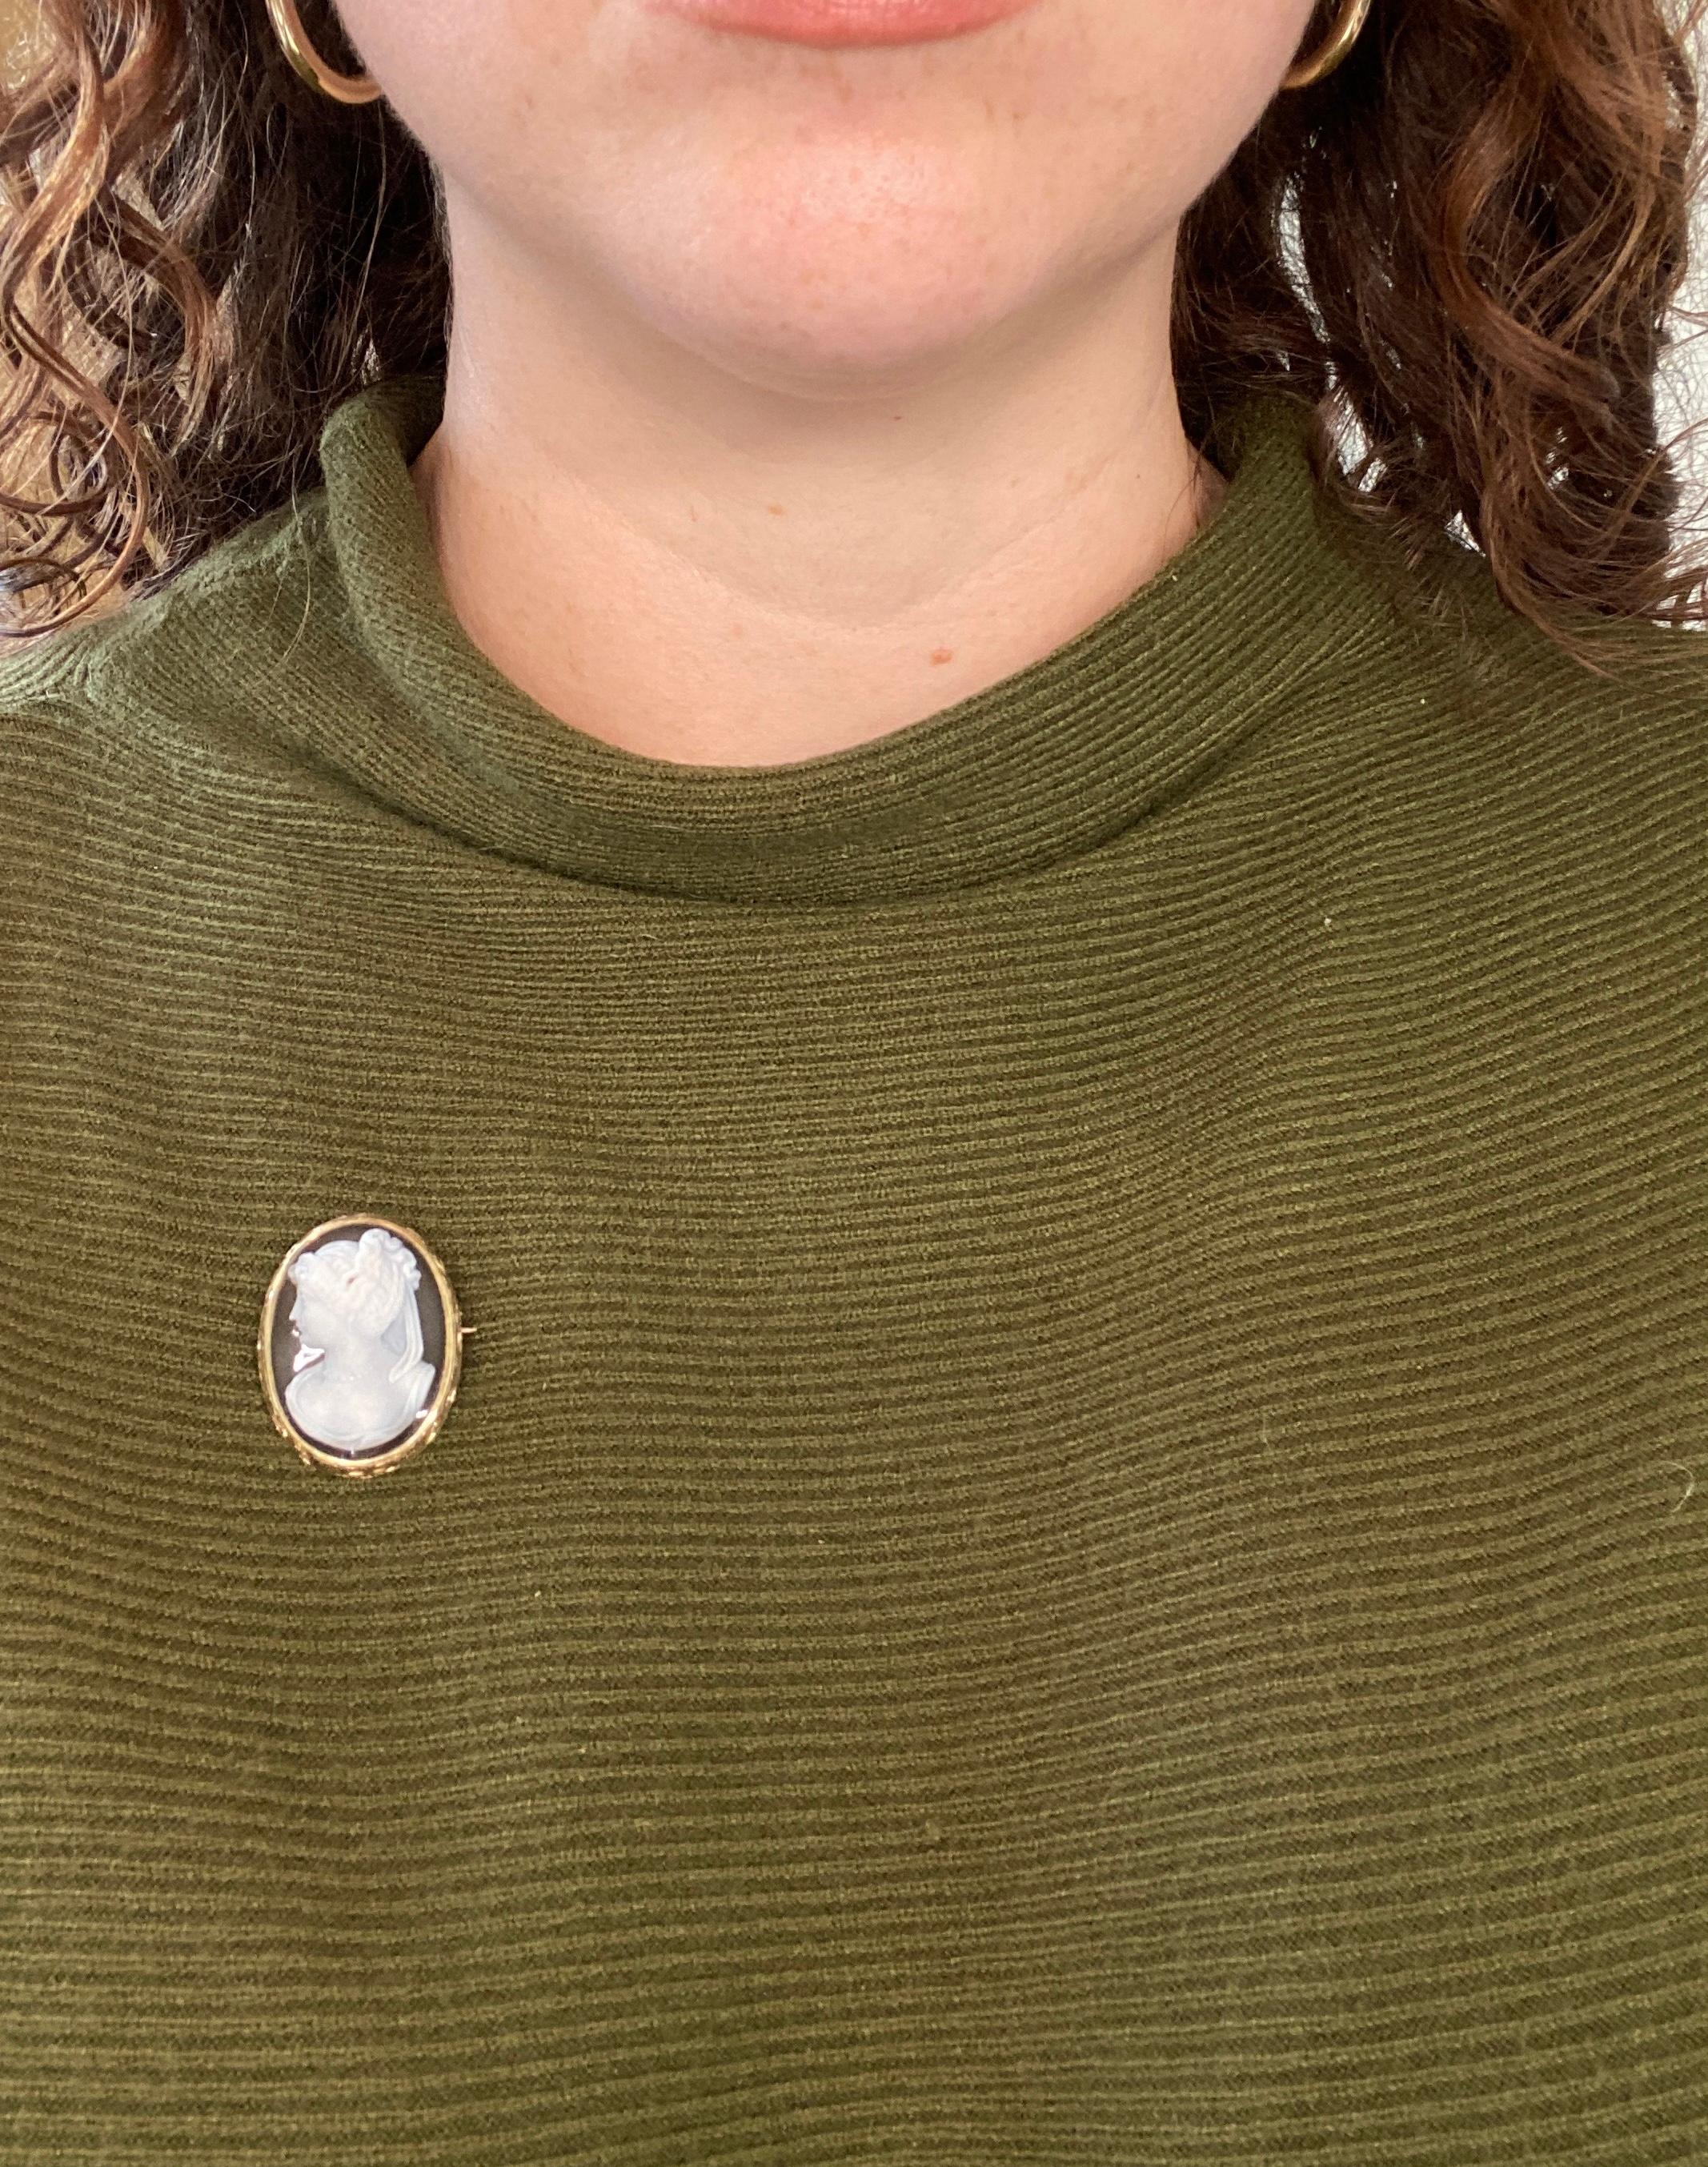 This hardstone (agate) cameo is haloed in hand-engraved 10k yellow gold. This lovely lady has beautifully coiffed hair topped with a diadem, a lovely face, and even tiny drop earrings. The attention to detail is wonderful on this antique cameo. At